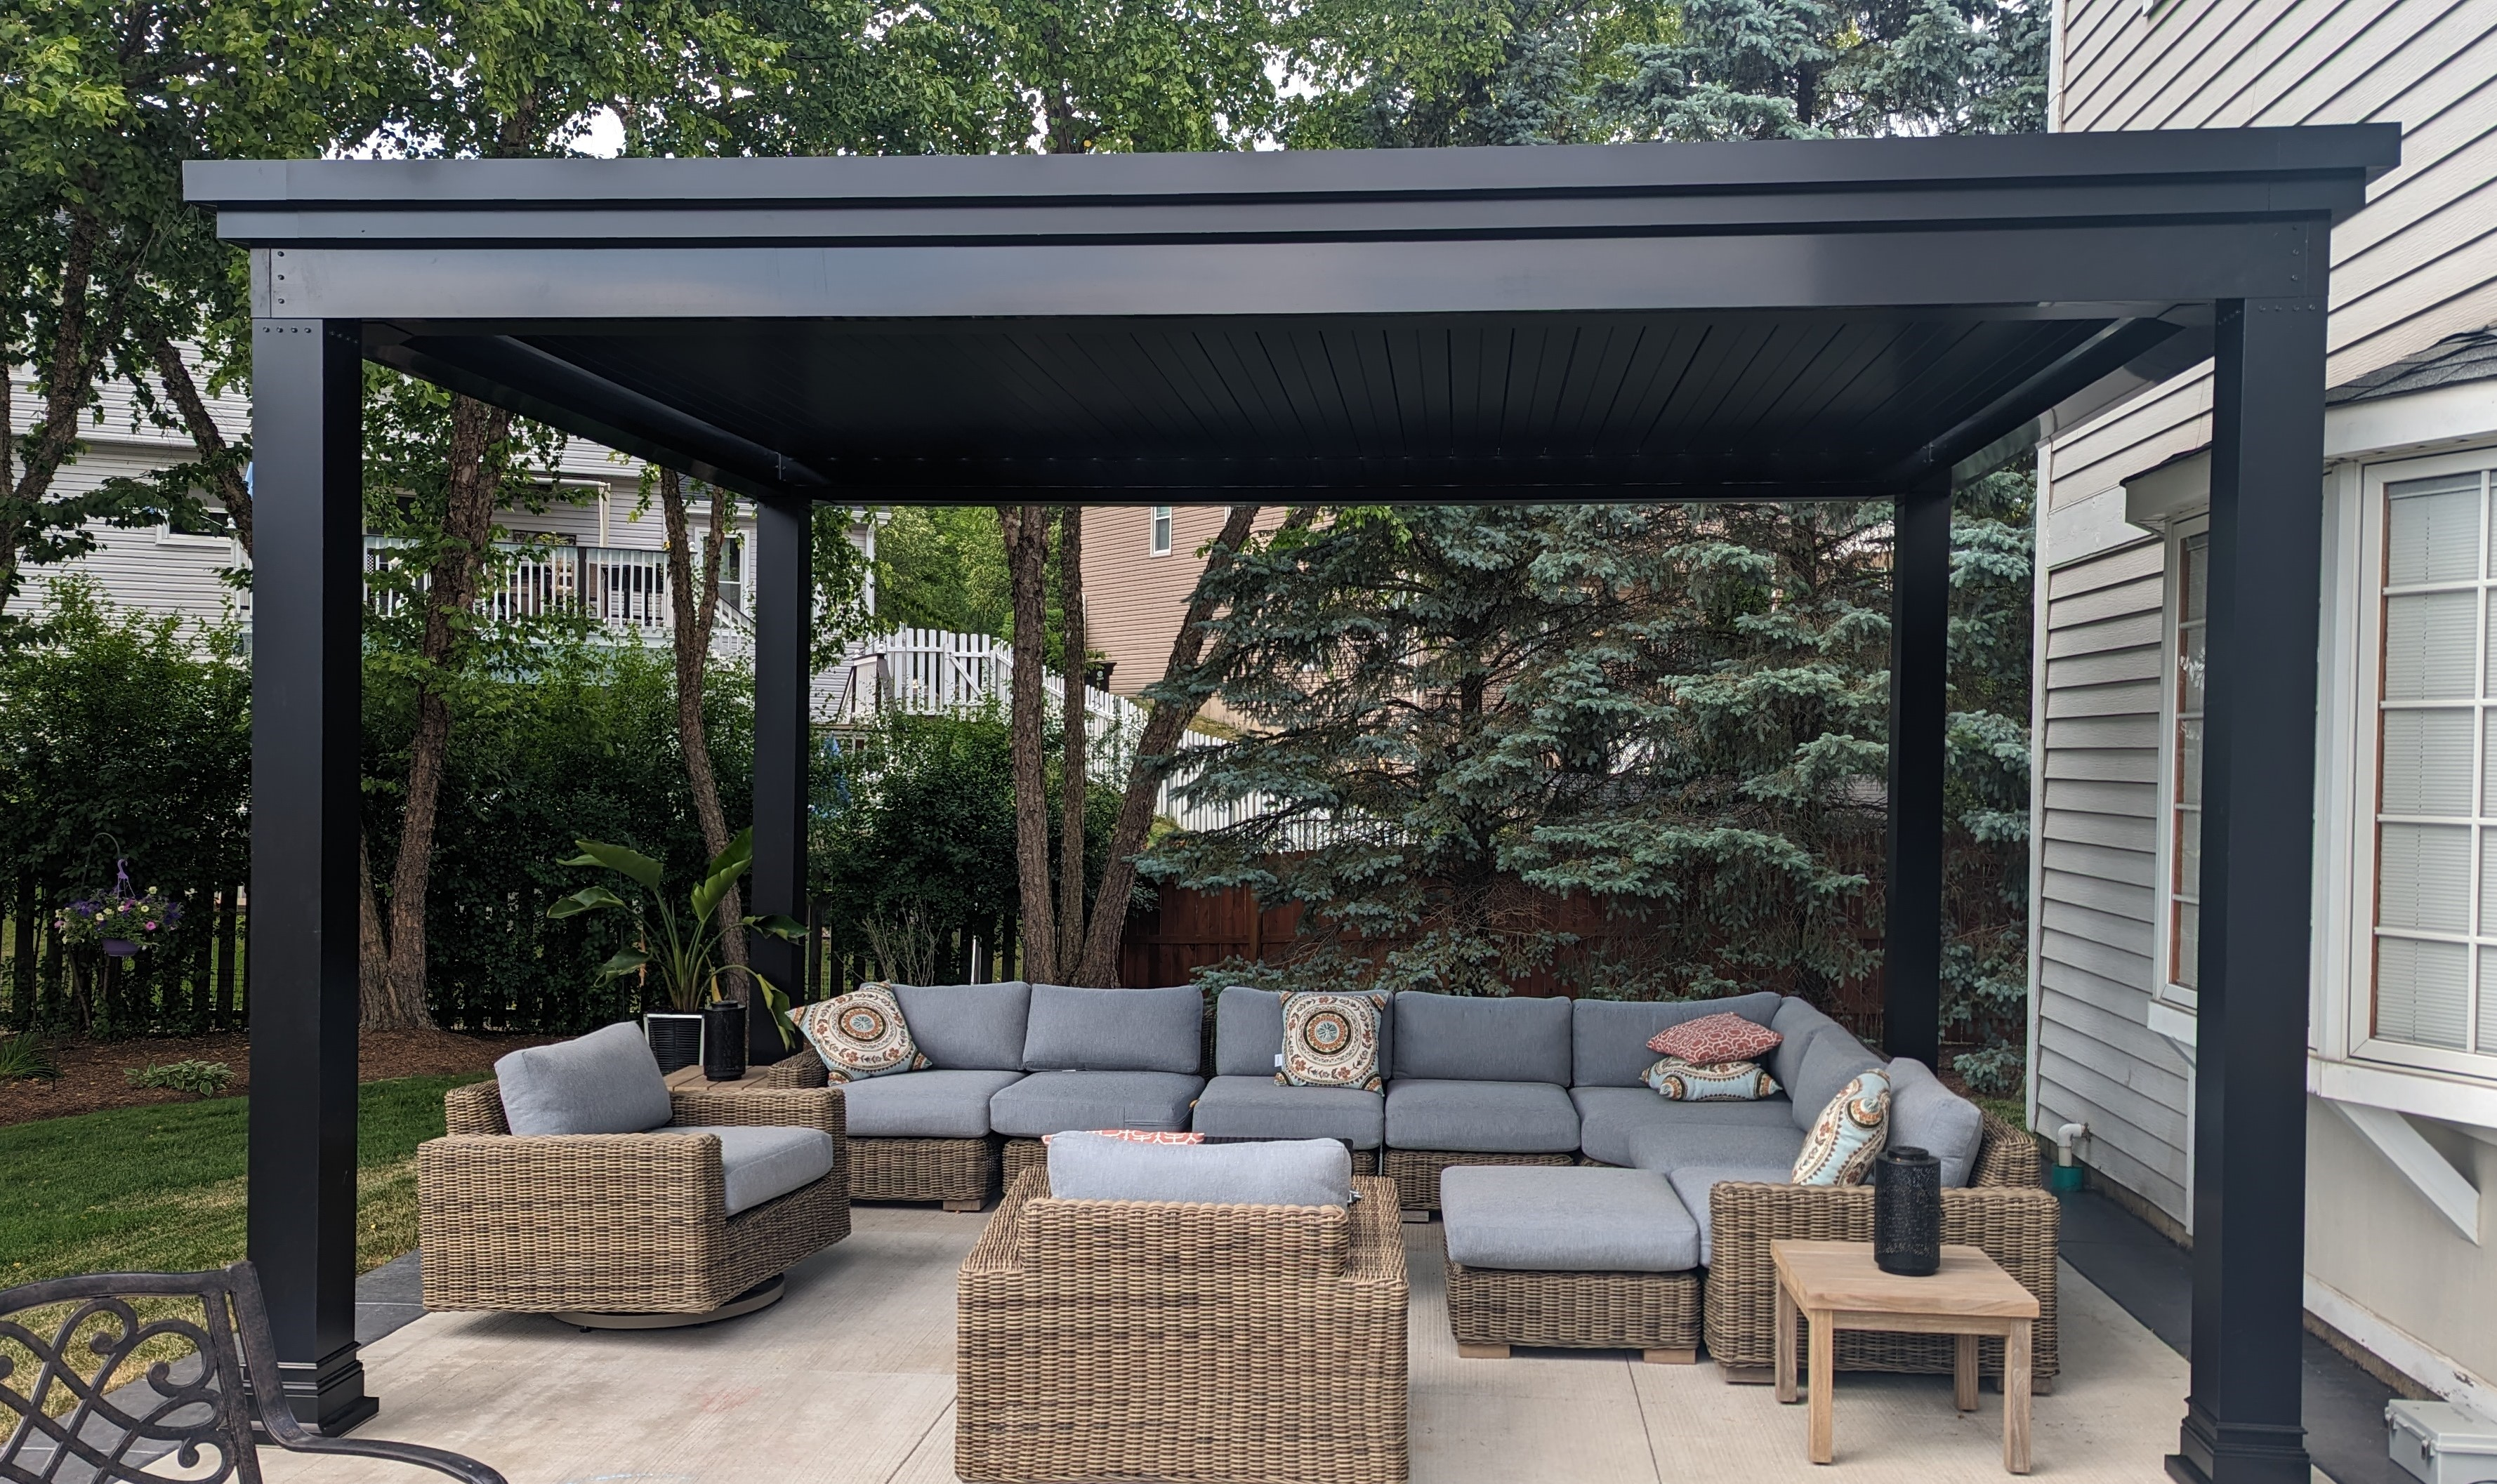 outdoor living area allows you and your guests to comfortably enjoy the outdoors.